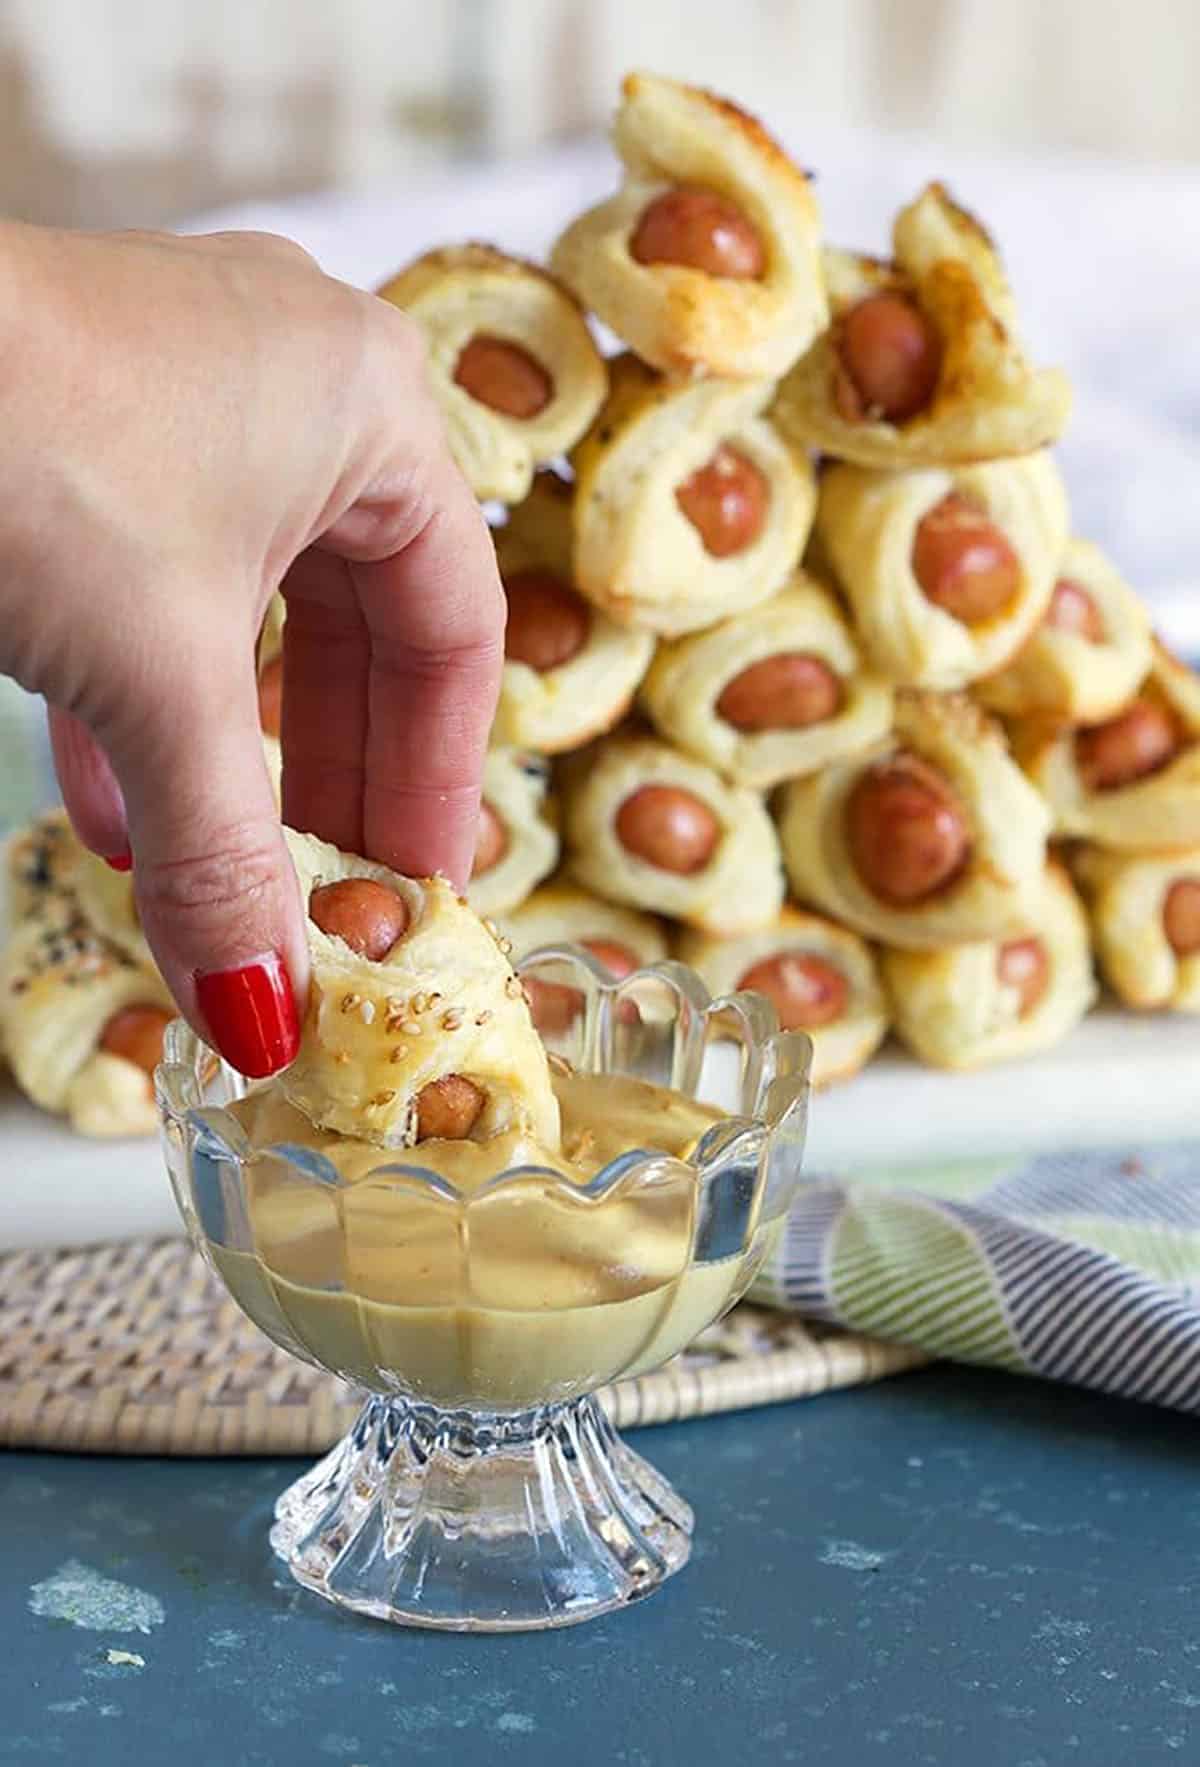 Pigs in a Blanket being dipped into mustard in a glass dish on a blue background.